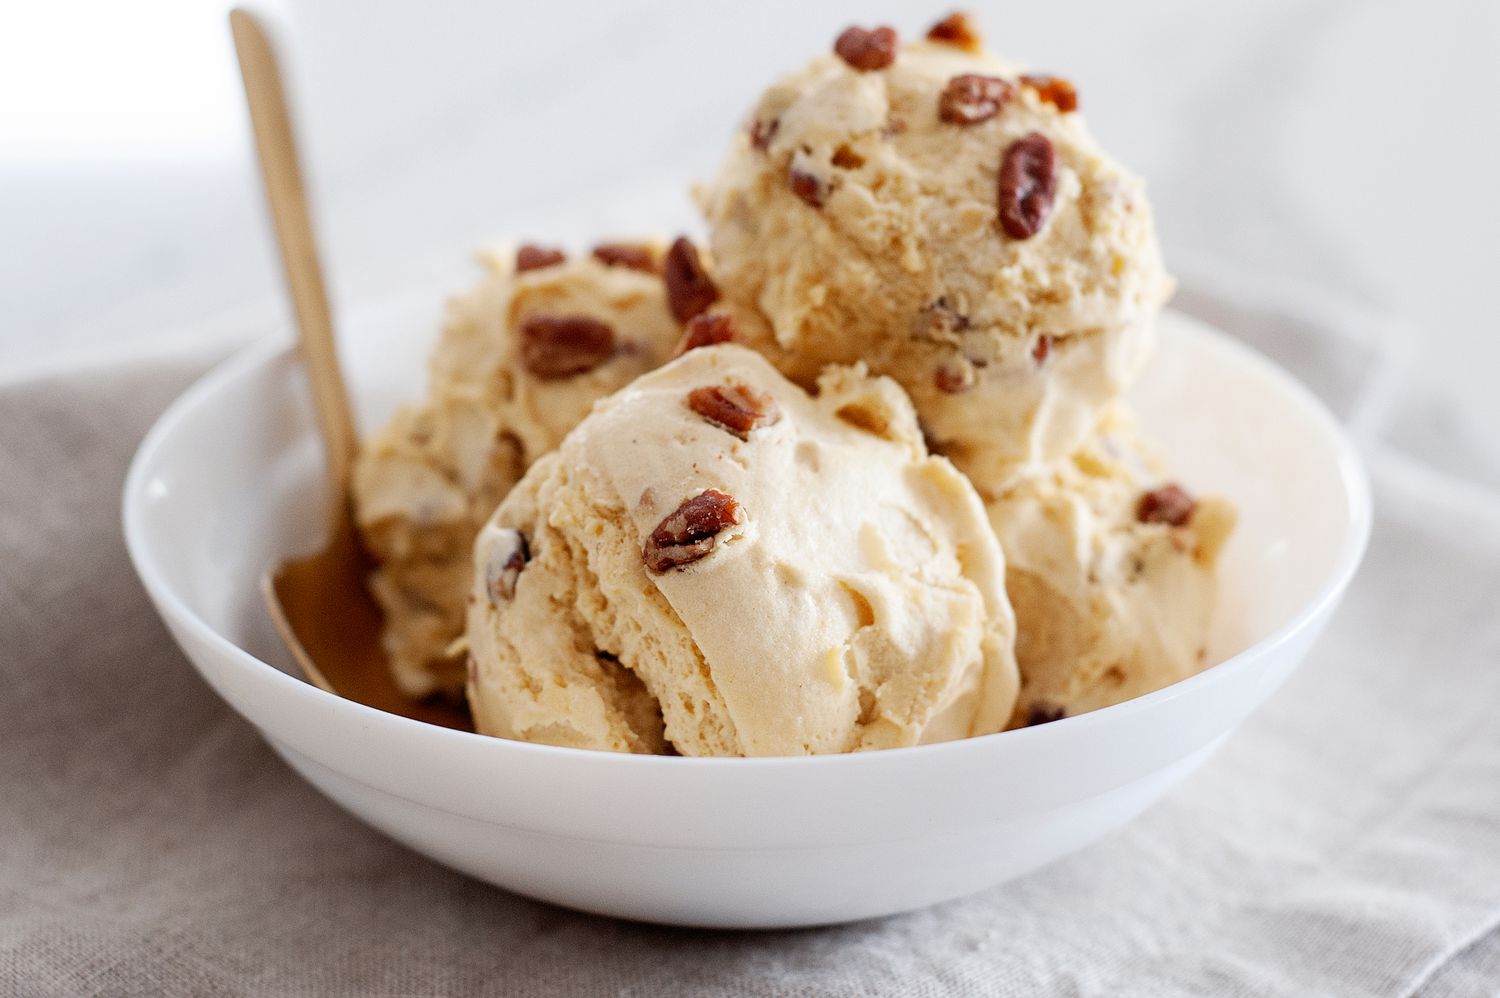 How To Make Homemade Butter Pecan Ice Cream Without Using Ice Cream Maker